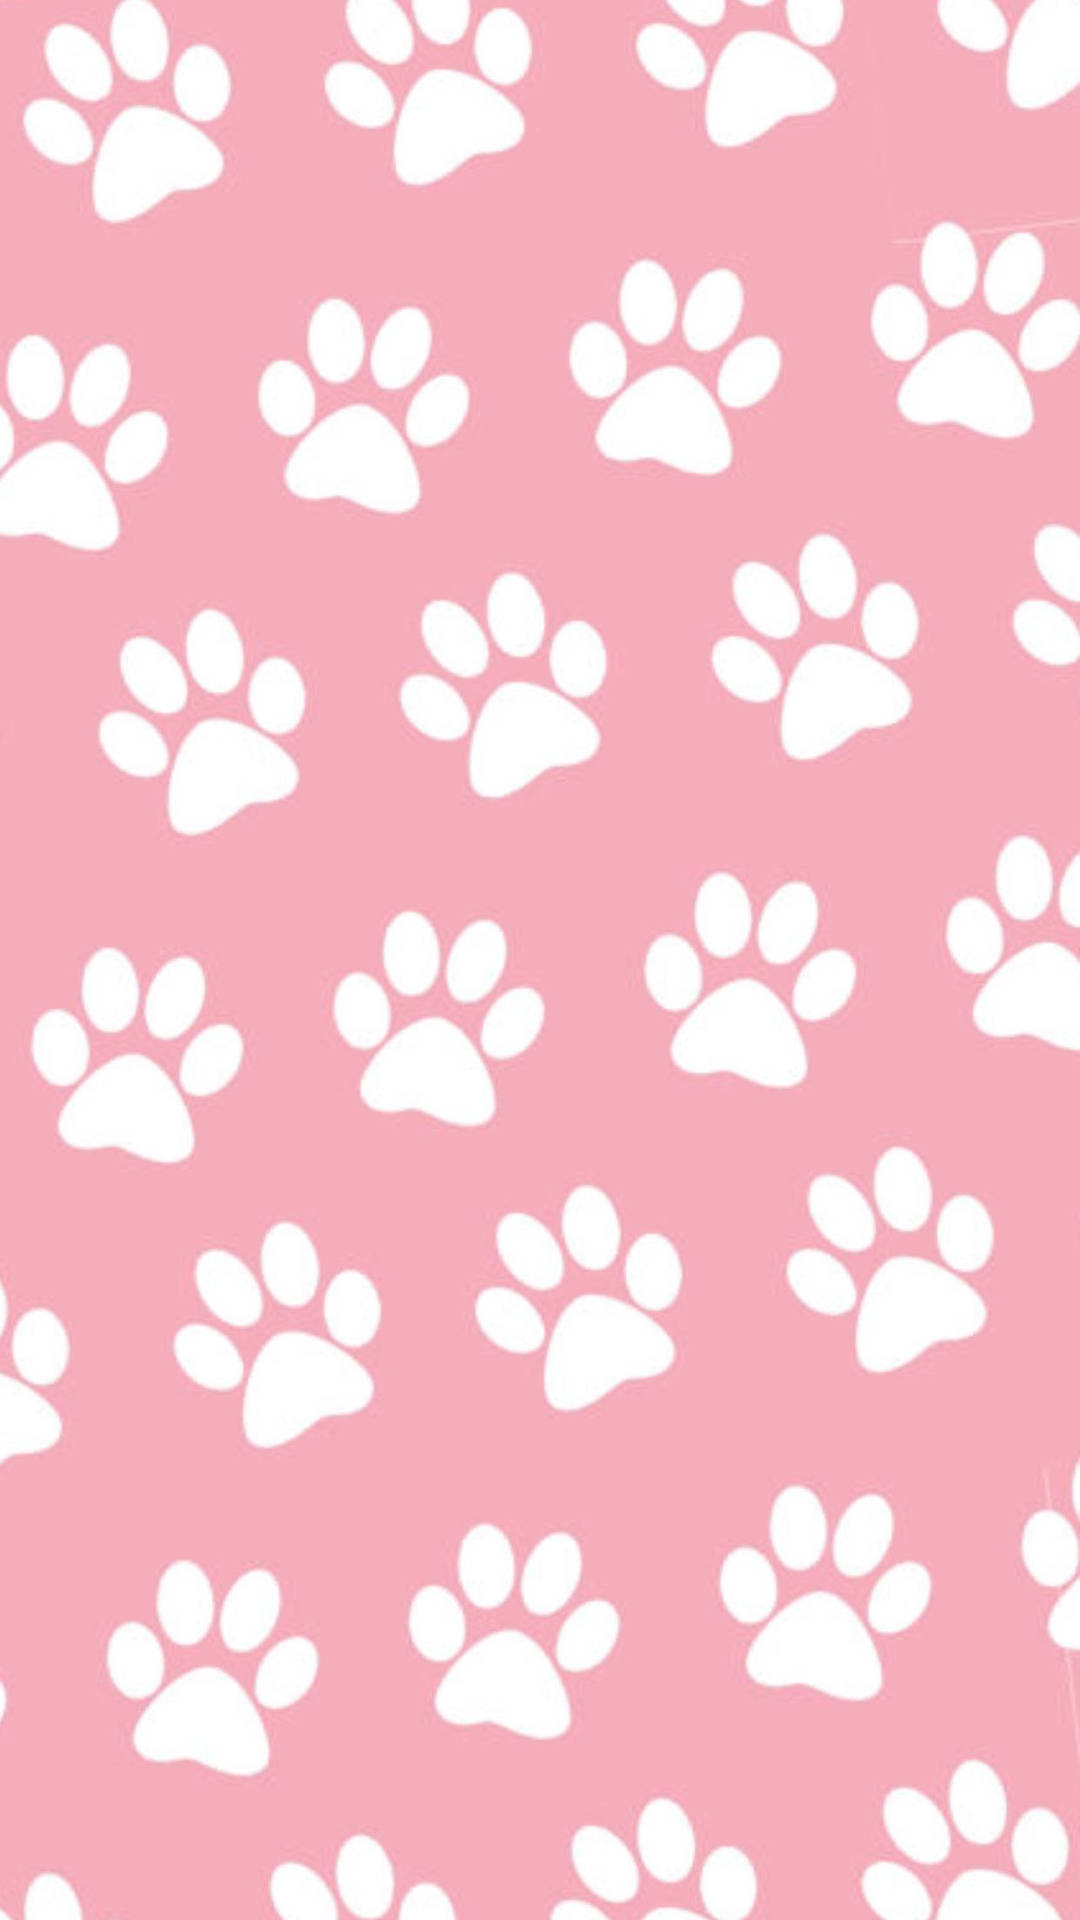 Paw Print Background Vector Art Icons and Graphics for Free Download